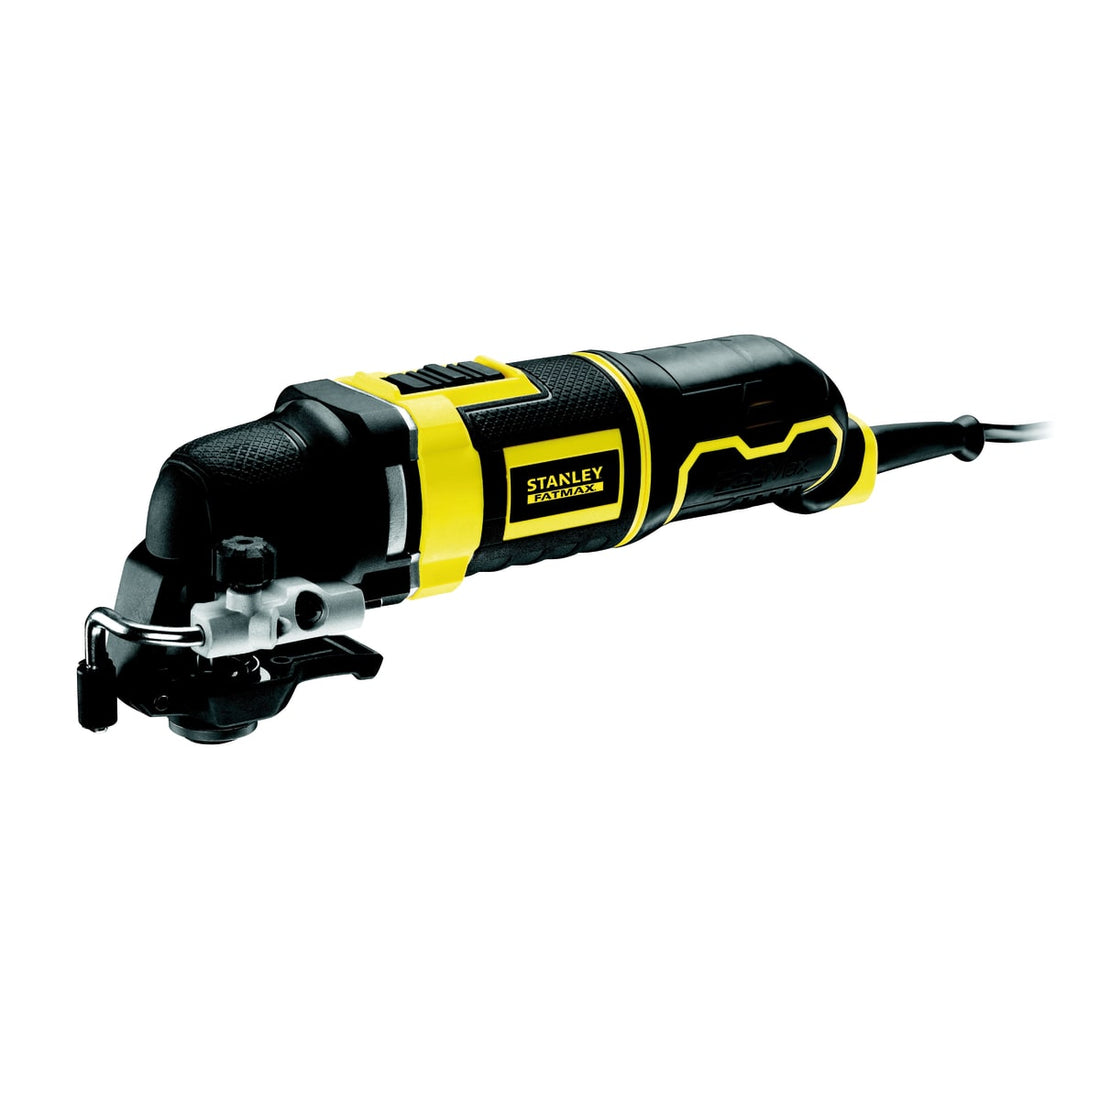 STANLEY FATMAX MINI-TOOL 230V, WITH 22 ACCESSORIES